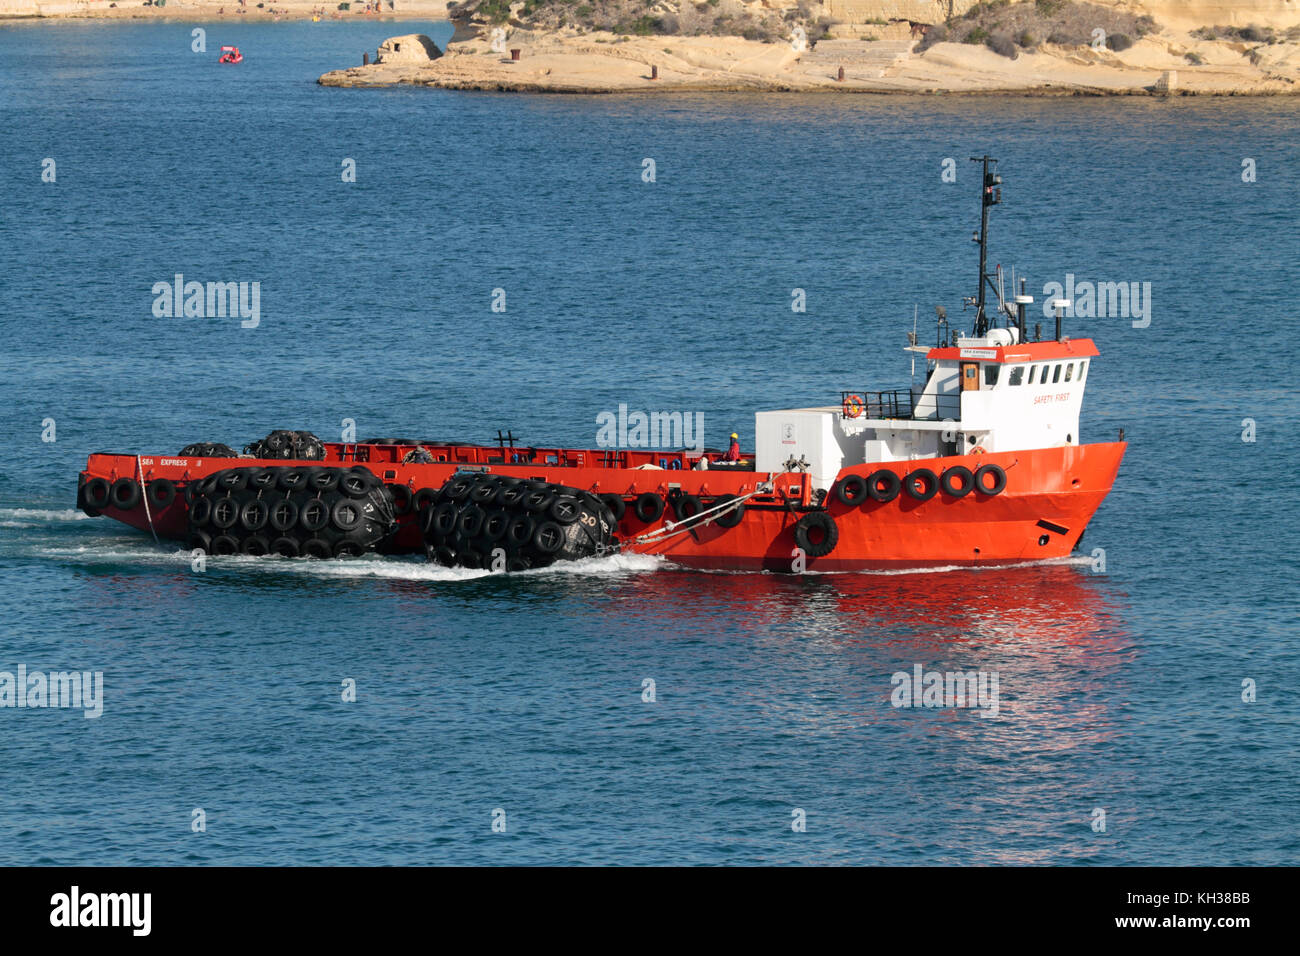 The offshore supply ship Sea Express III towing a set of pneumatic rubber marine fenders as it enters harbor in Malta. Maritime support logistics. Stock Photo